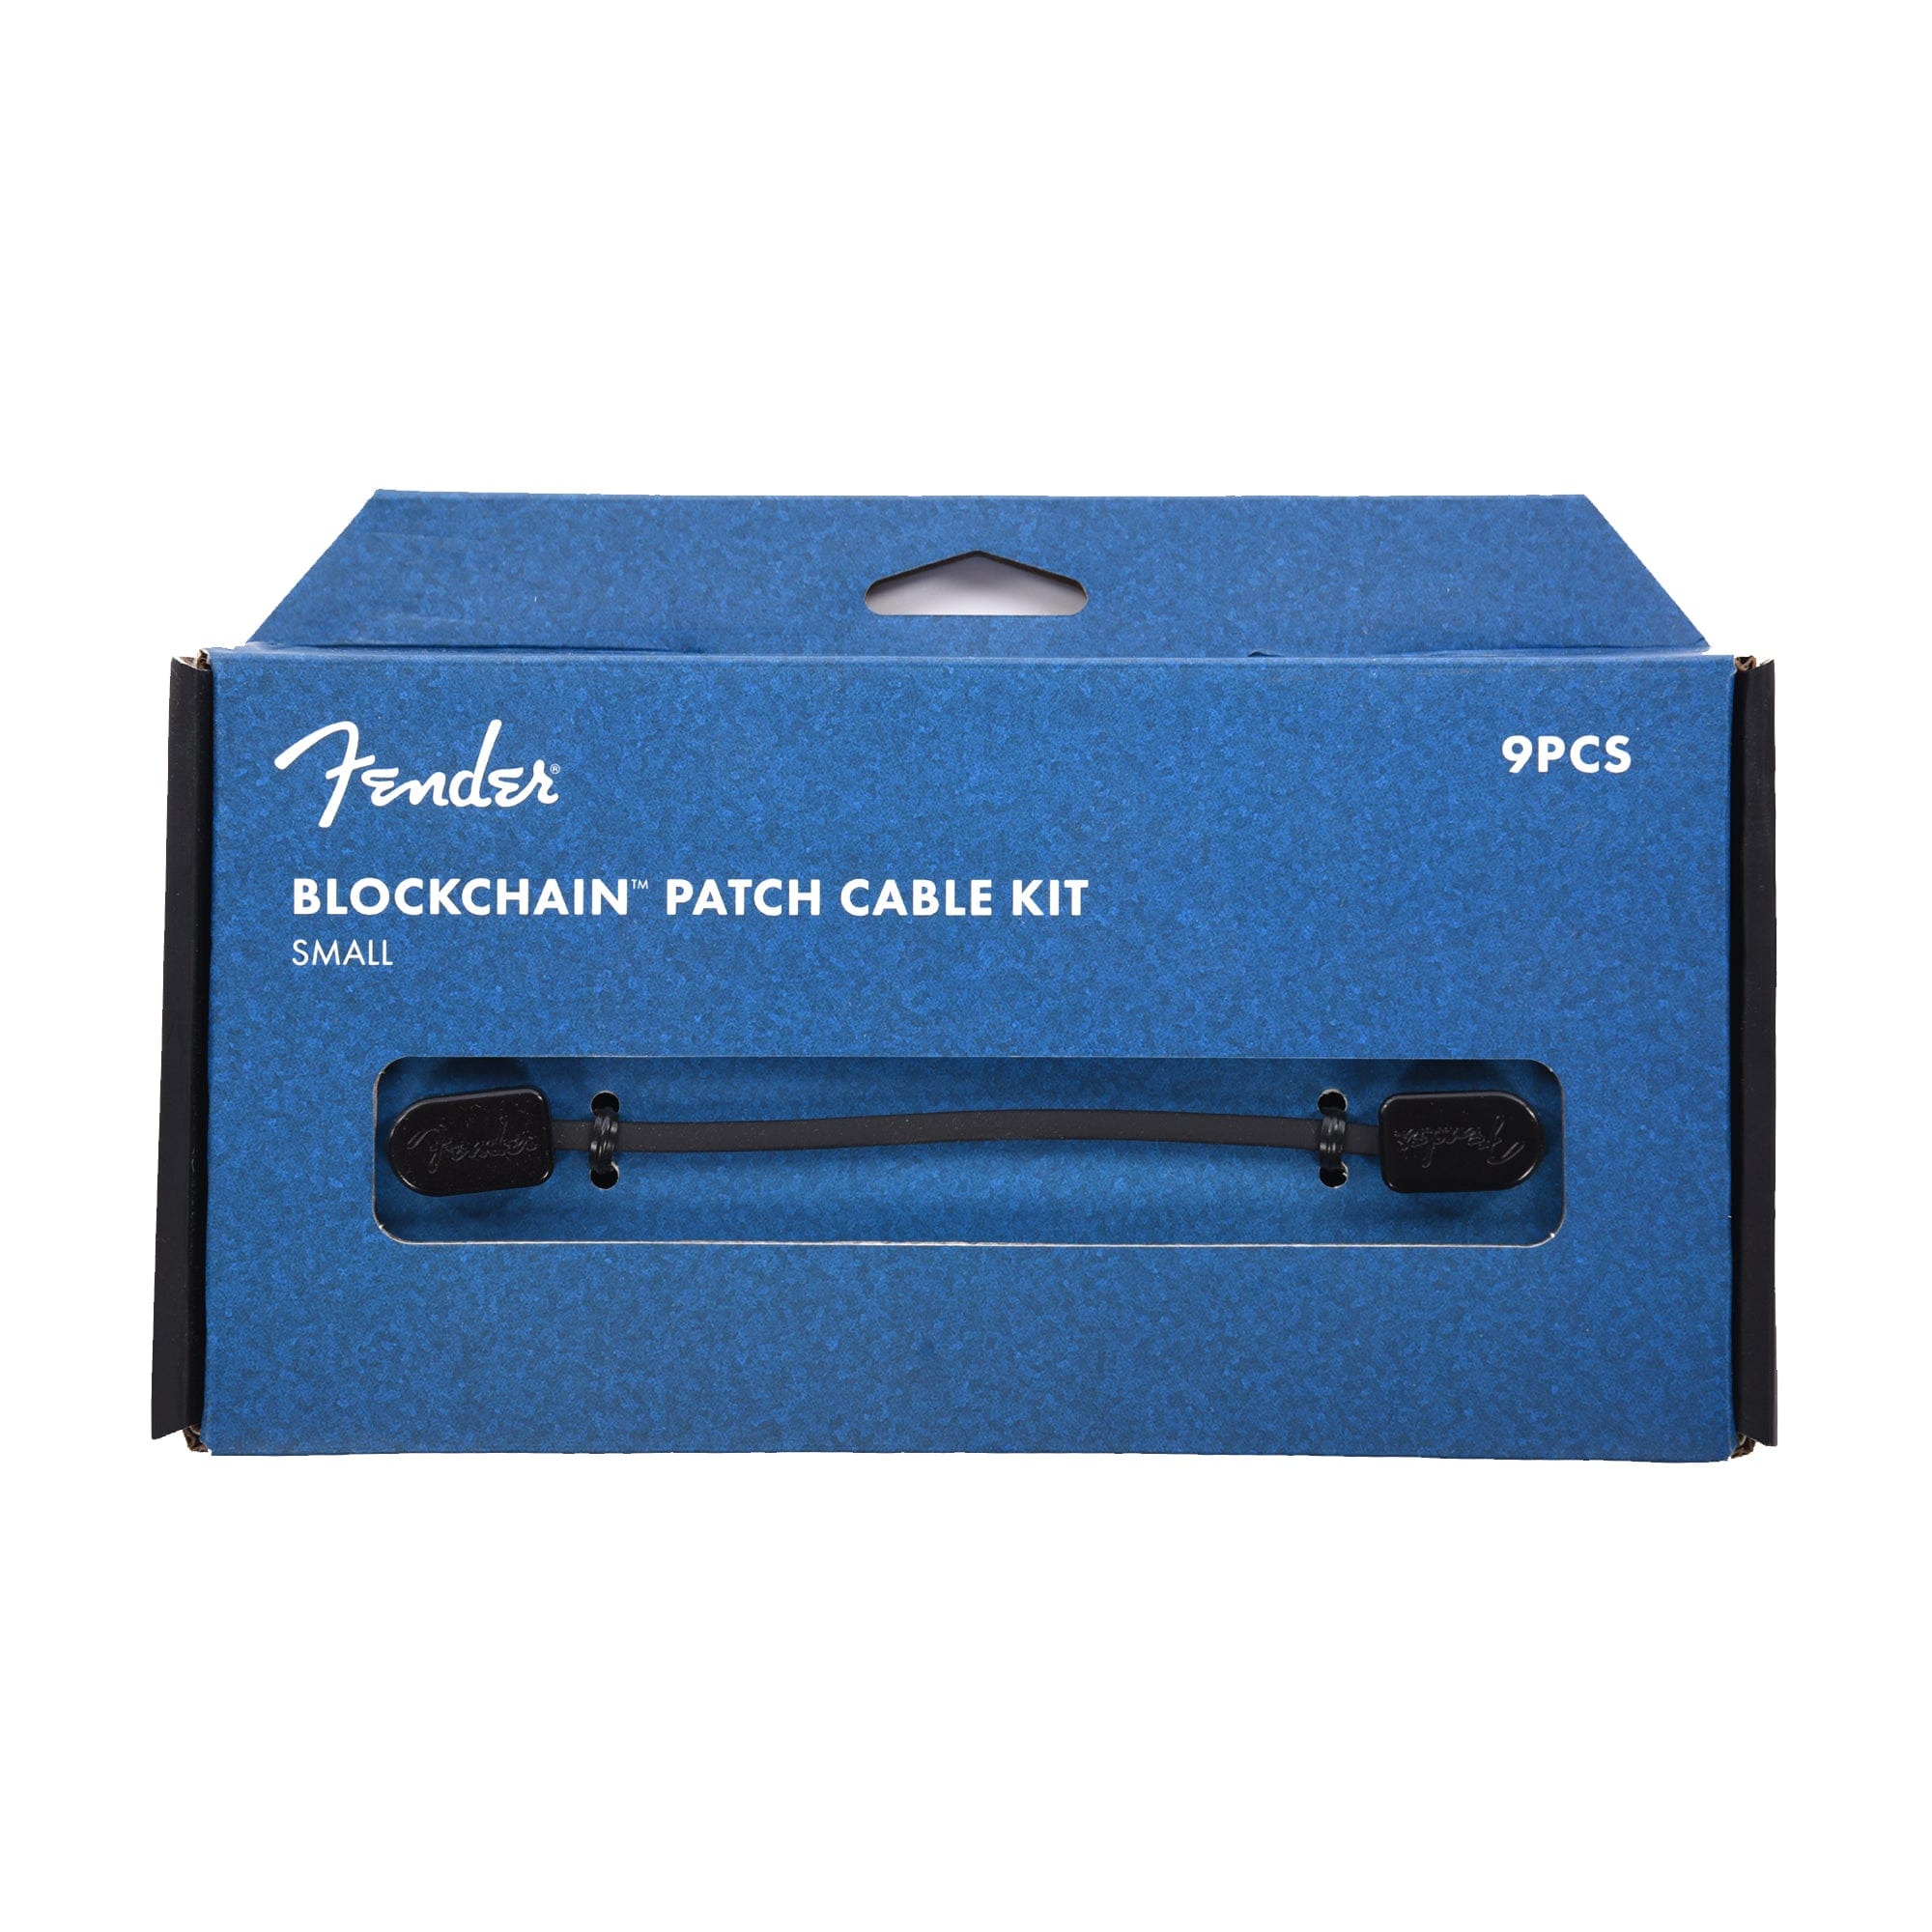 Fender Blockchain Patch Cable Kit, Small